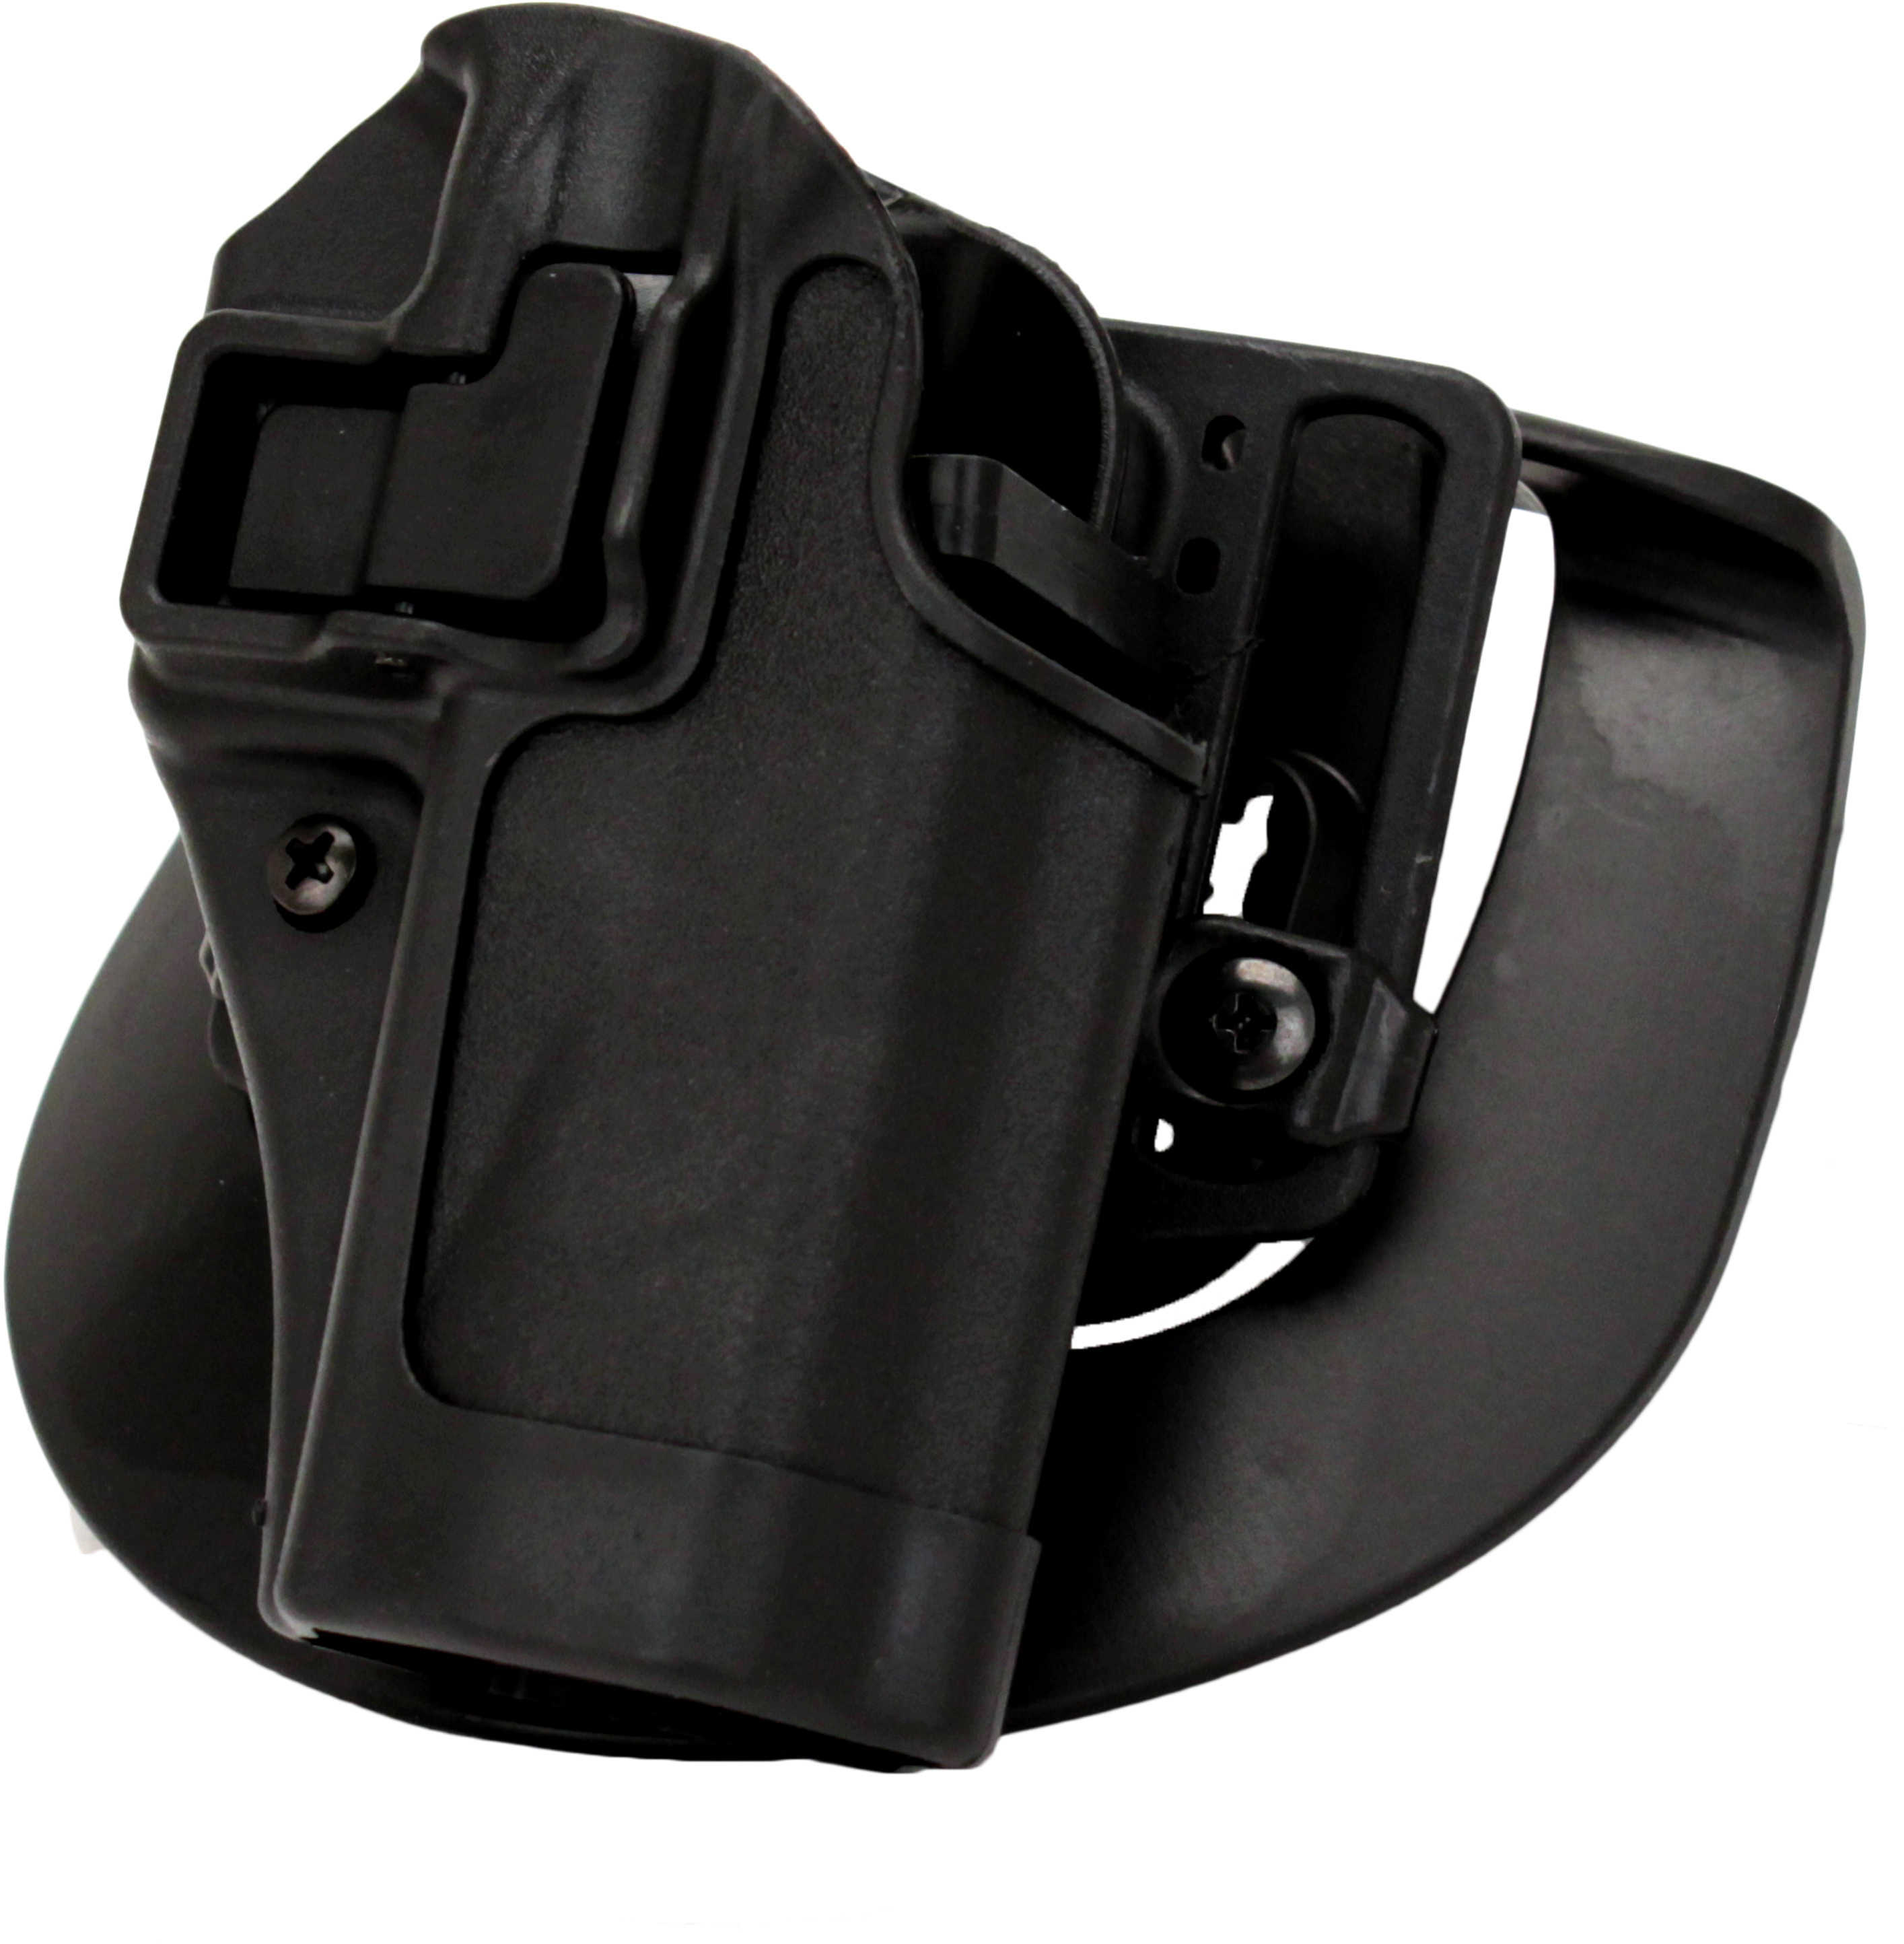 Blackhawk Serpa CQC Matte Holster With Active Retention System - Right Handed Size 25: S&W M&P 9/40 And Sigm